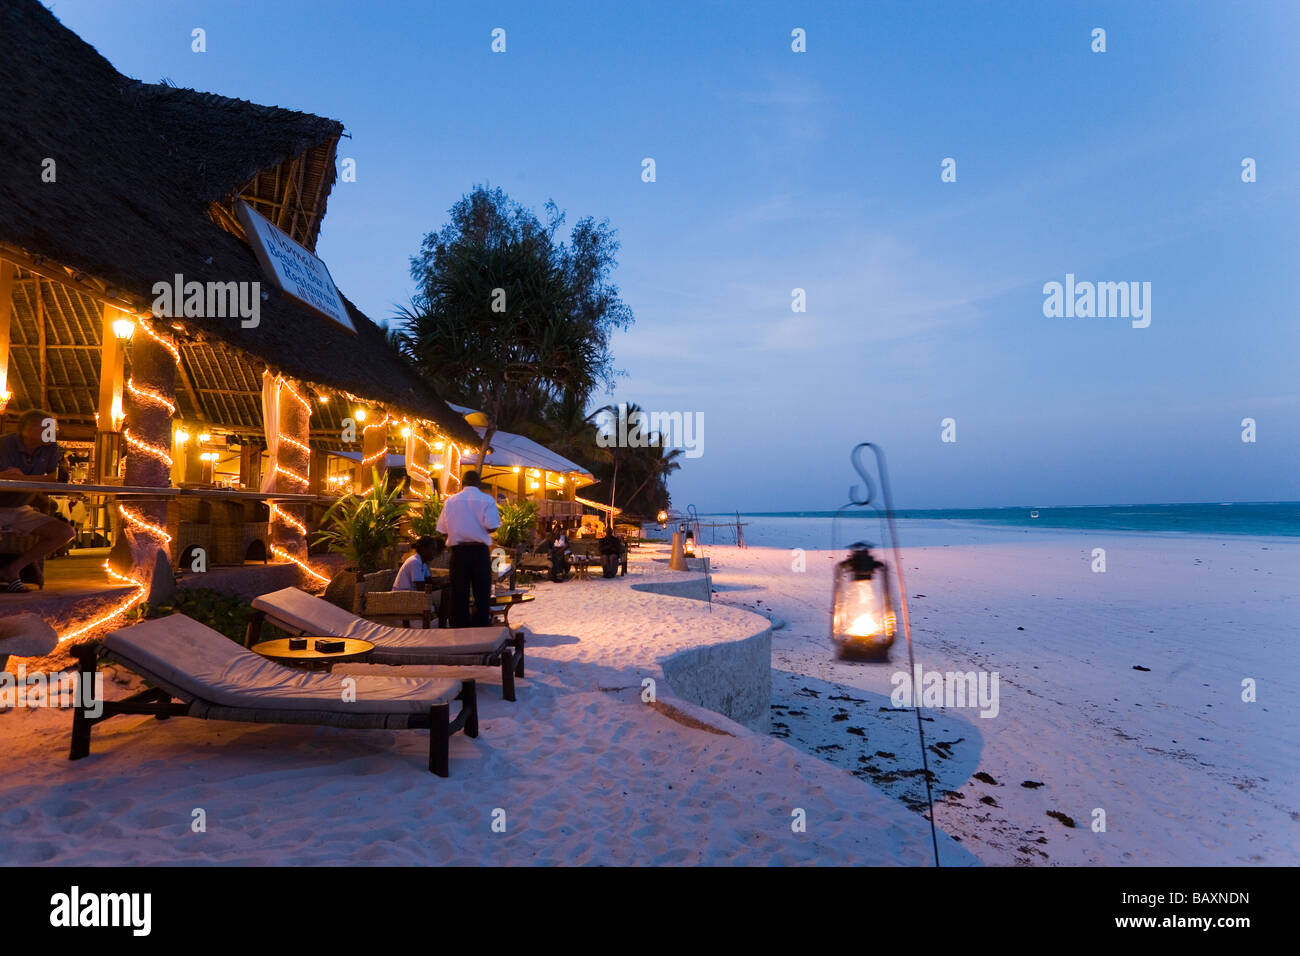 Sunlougers and beach bar in the evening, The Sands, at Nomad, Diani Beach, Kenya Stock Photo